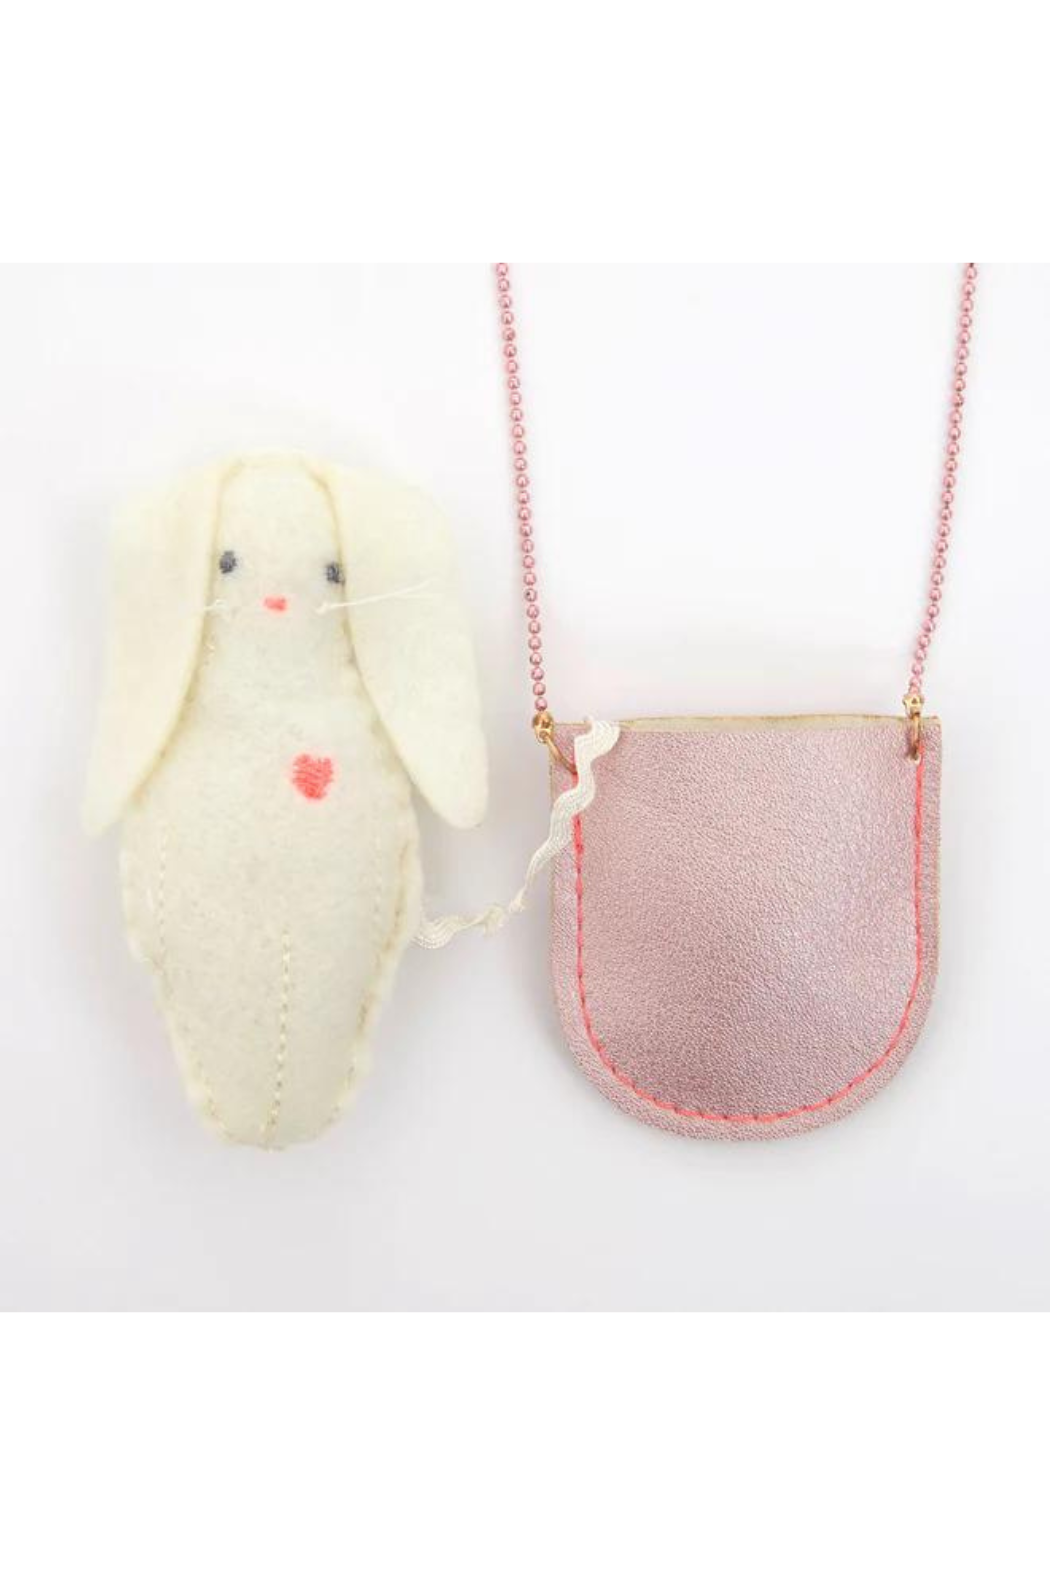  KESYOO 4pcs Necklace Bunny Gifts Bunny Decor Simple Necklace  Play Jewelry for Little Girls Age 3 Moon Ornament Girls Jewelry Ages 4-6  Small Necklace Rabbit on The Moon Necklace Blue Charm 